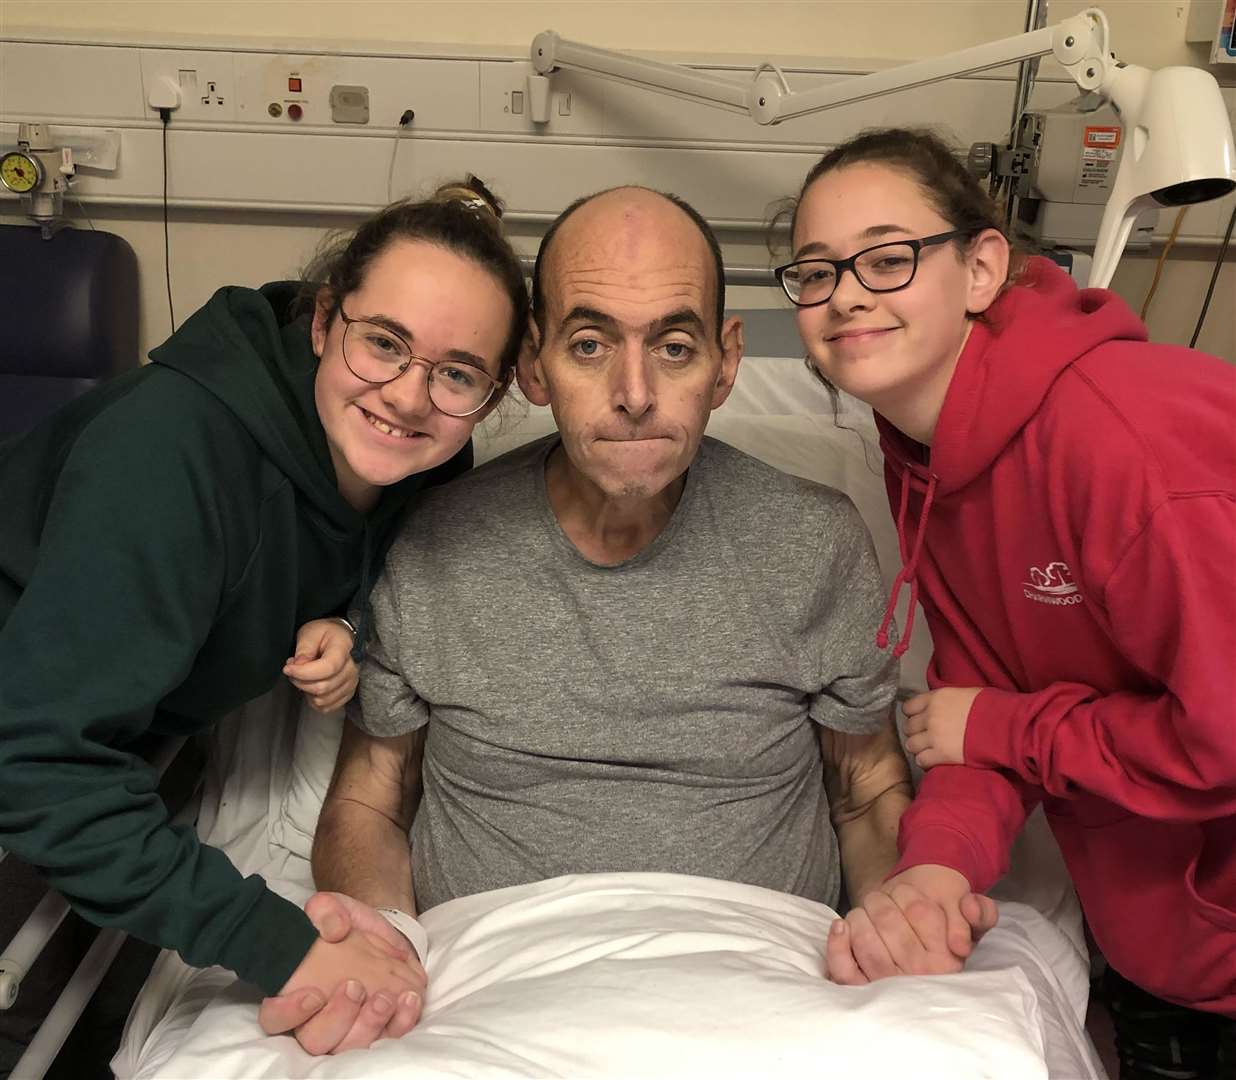 Freya Peachey, left, with her sister Matilda and dad Mike in hospital shortly before he died